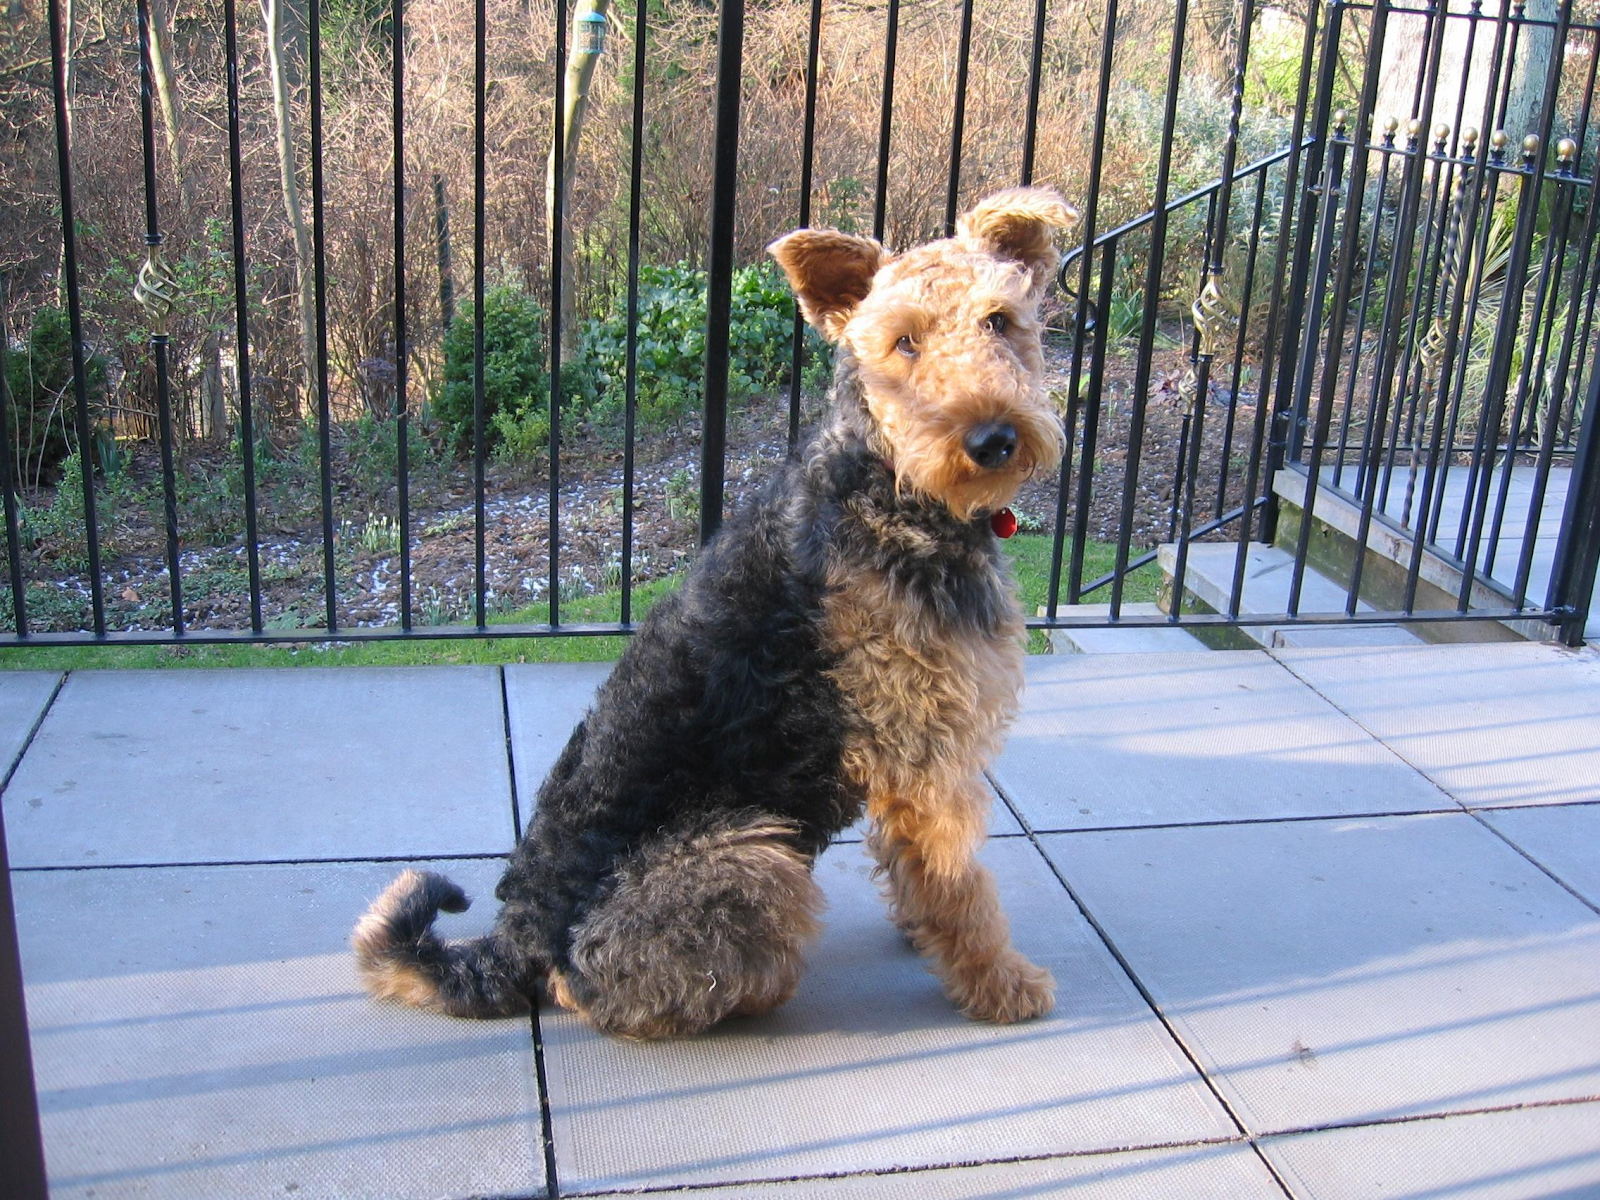 Rufus is sitting on a paved area in front of railings. He has a black and tan curly coat and triangular ears.